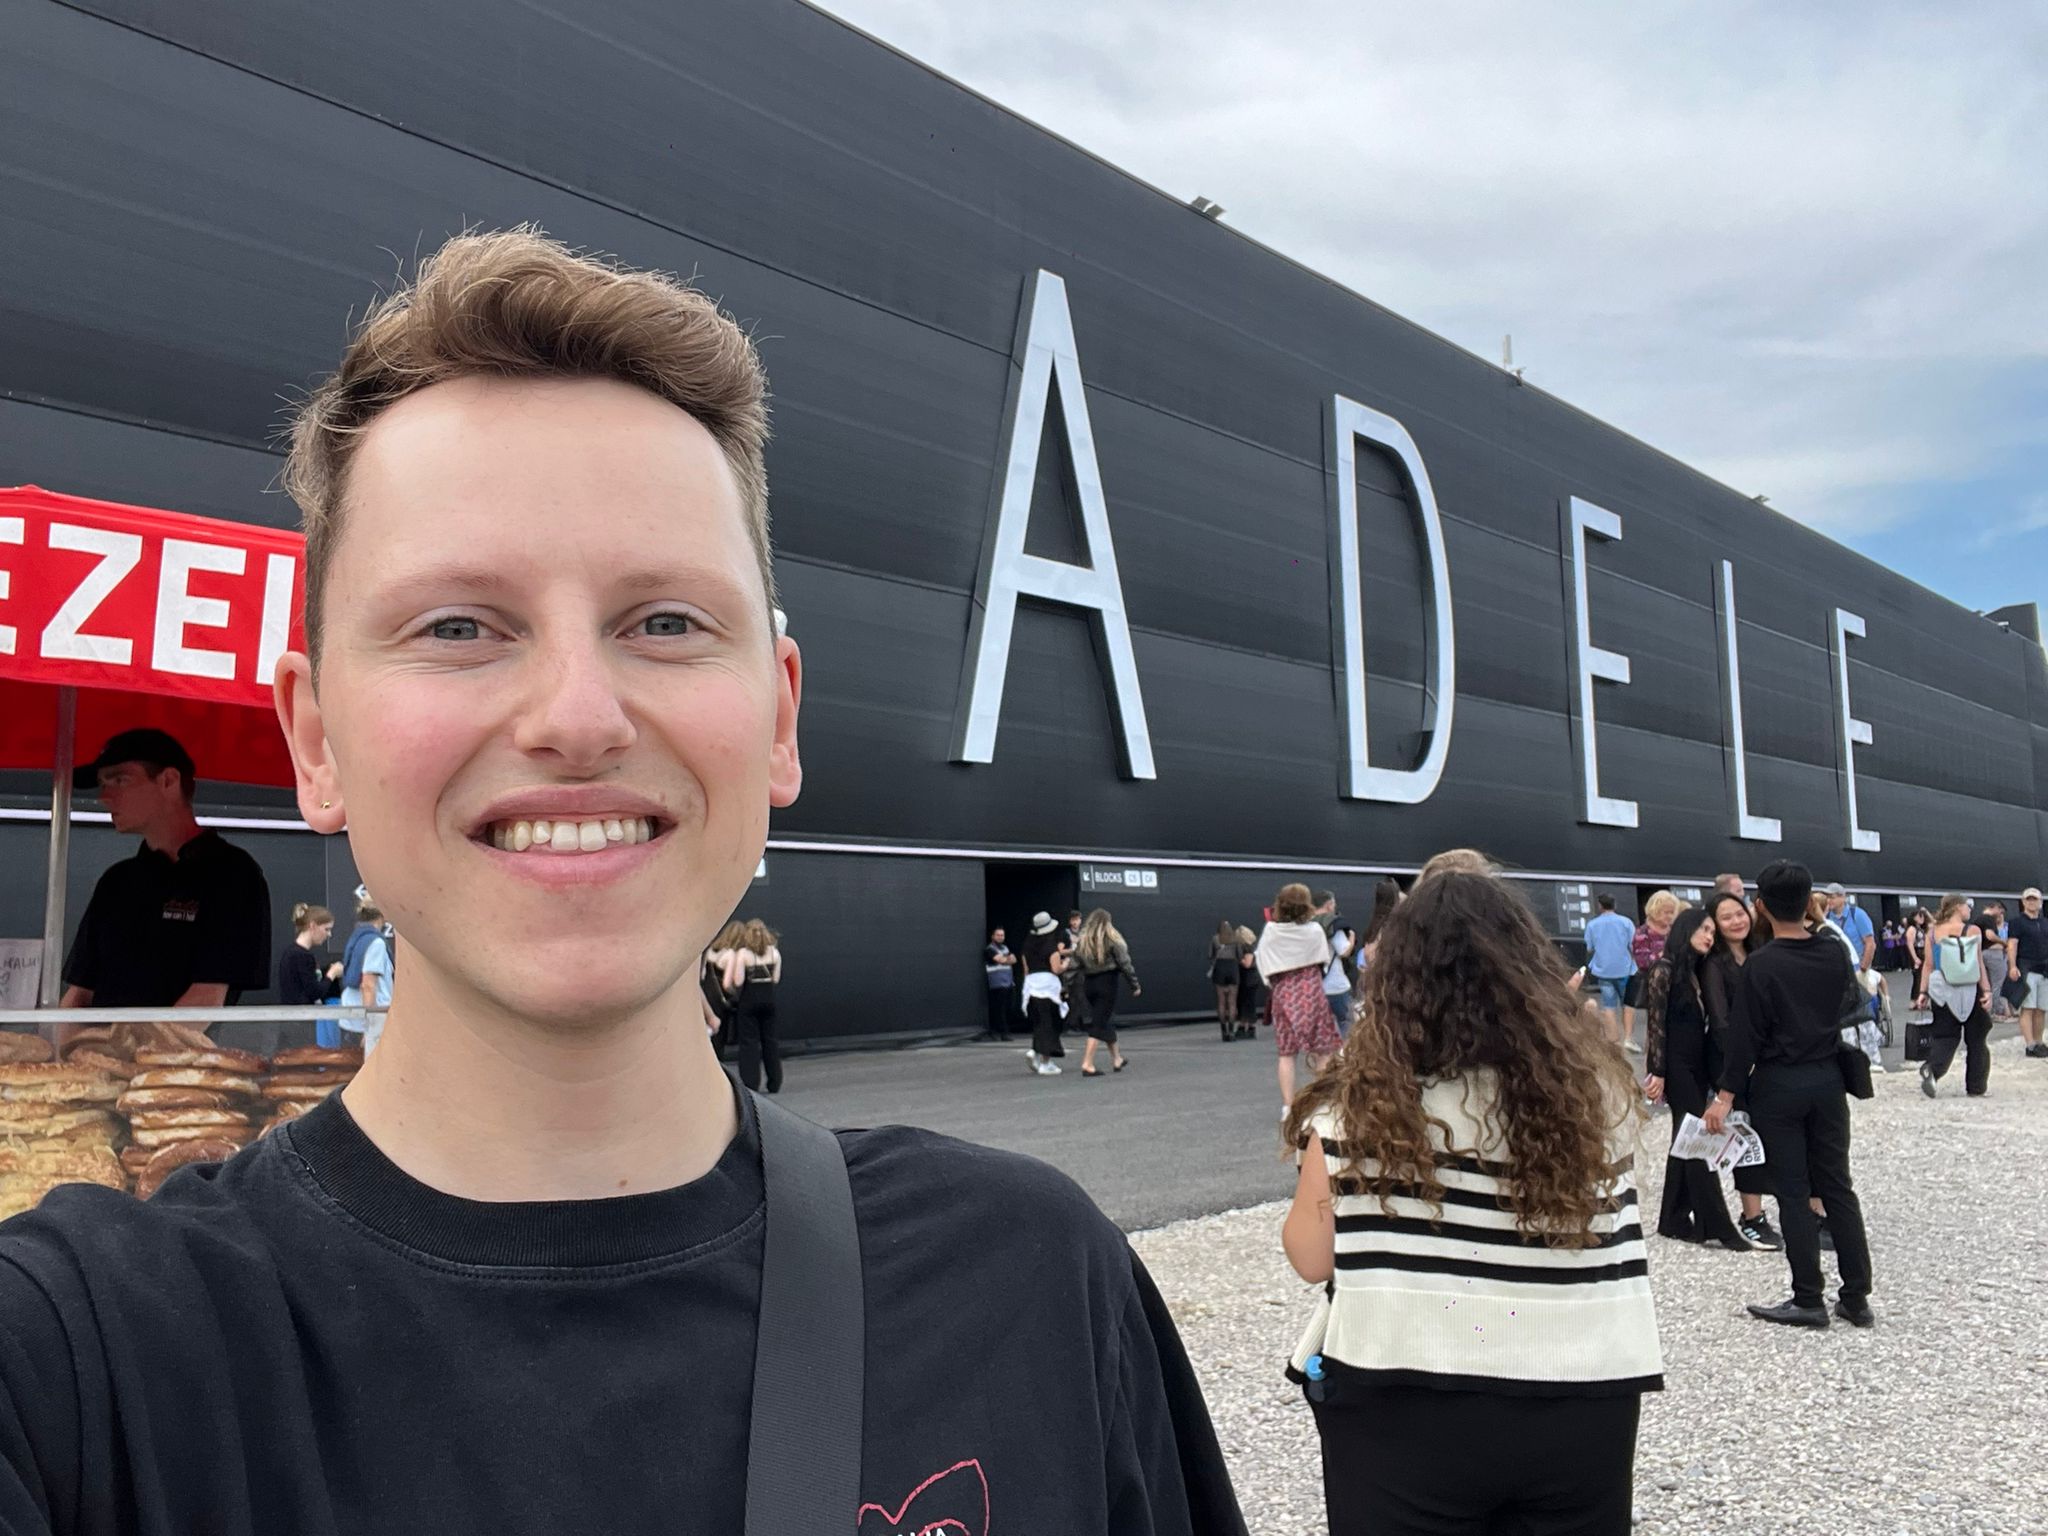 Howell Davies was in Munich to witness Adele's spectacular opening show